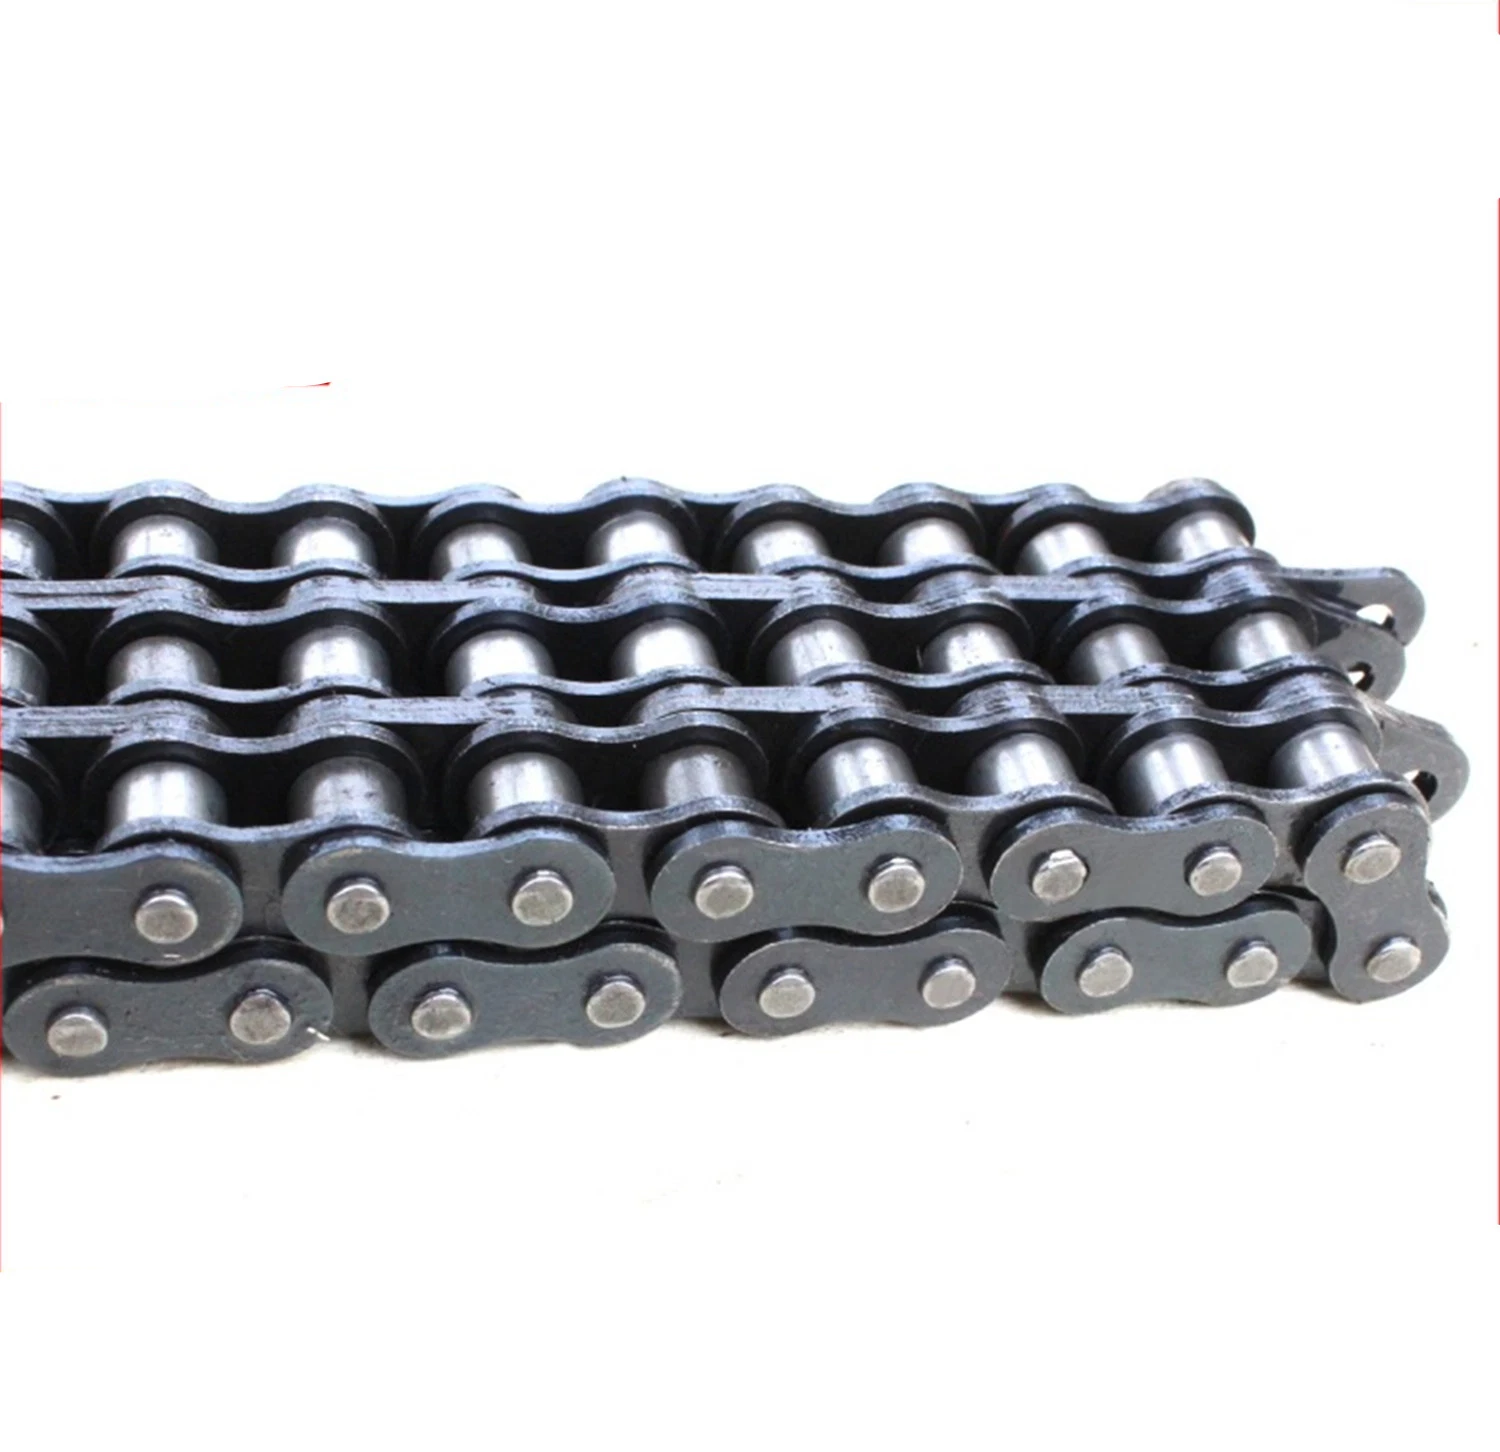 Transmission Gearbox Parts B Series Short Pitch Precision Triplex 16b-3 Roller Chains and Bush Chains